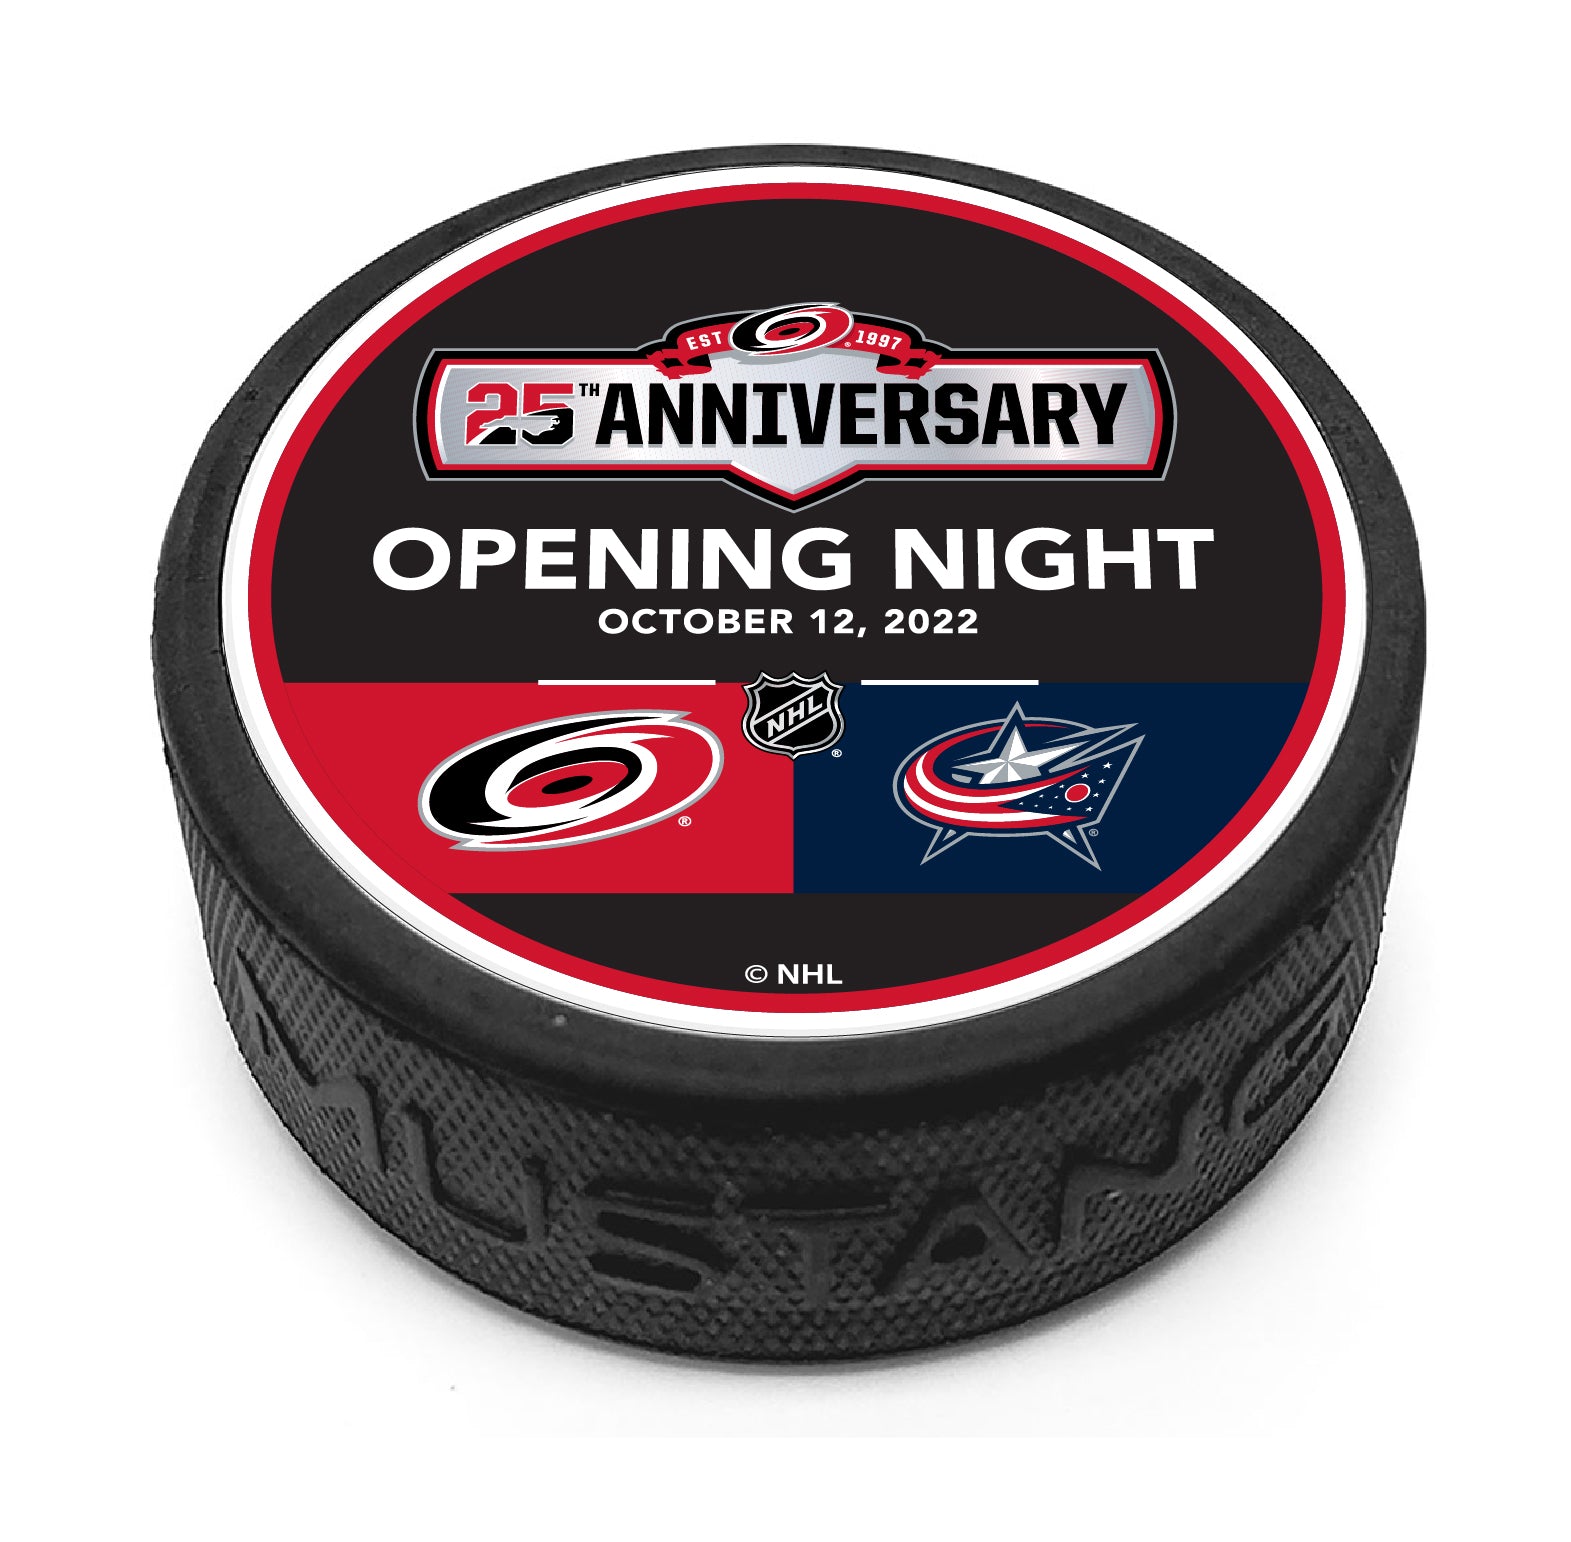 Hockey puck with the Hurricanes 25th Anniversary jersey patch logo and "Opening Night October 12, 2022" featuring the Hurricanes and Blue Jackets' logos on a black top face.